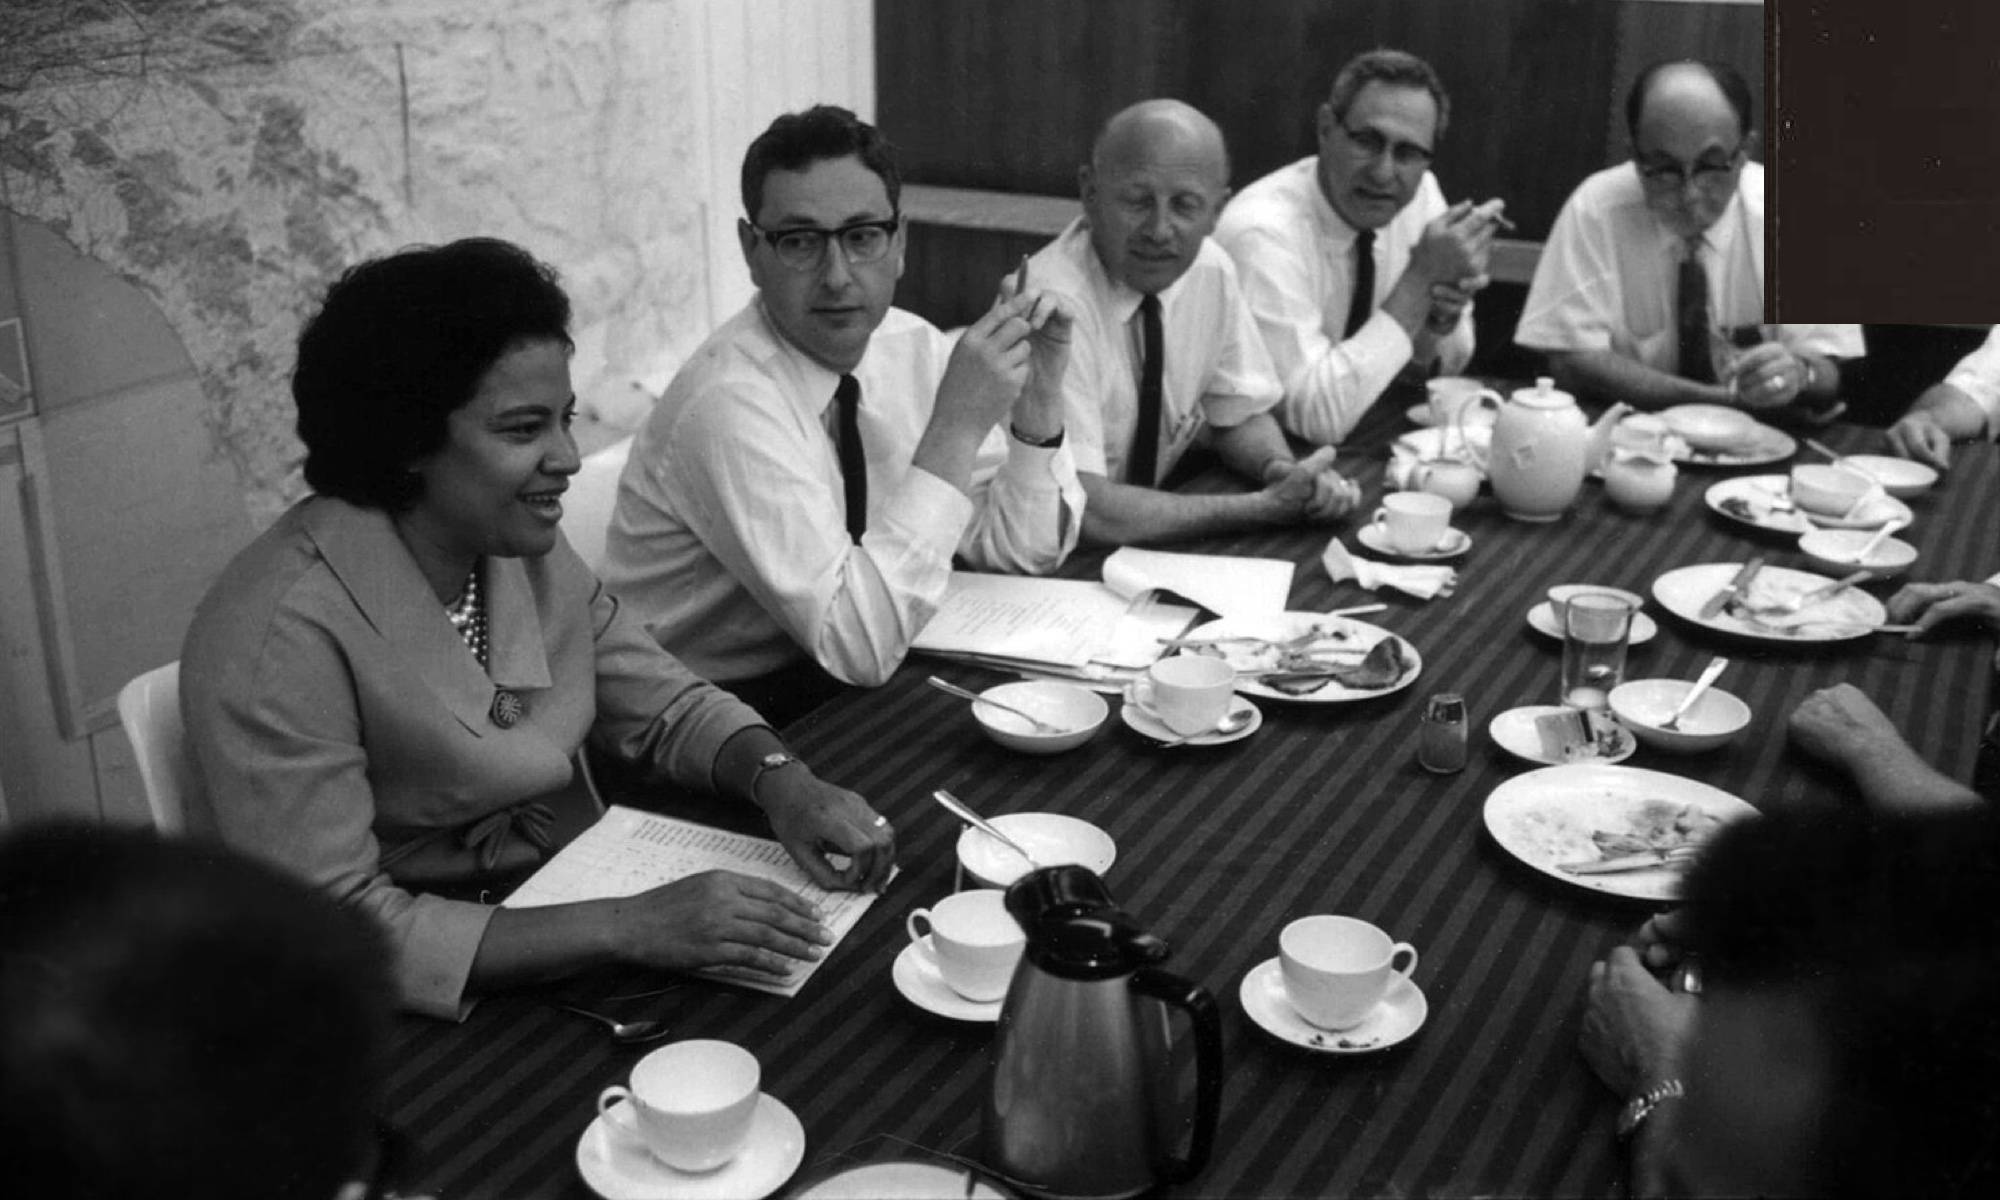 Architect Norma Sklarek, a black woman, sitting in a conference room surrounded by white men